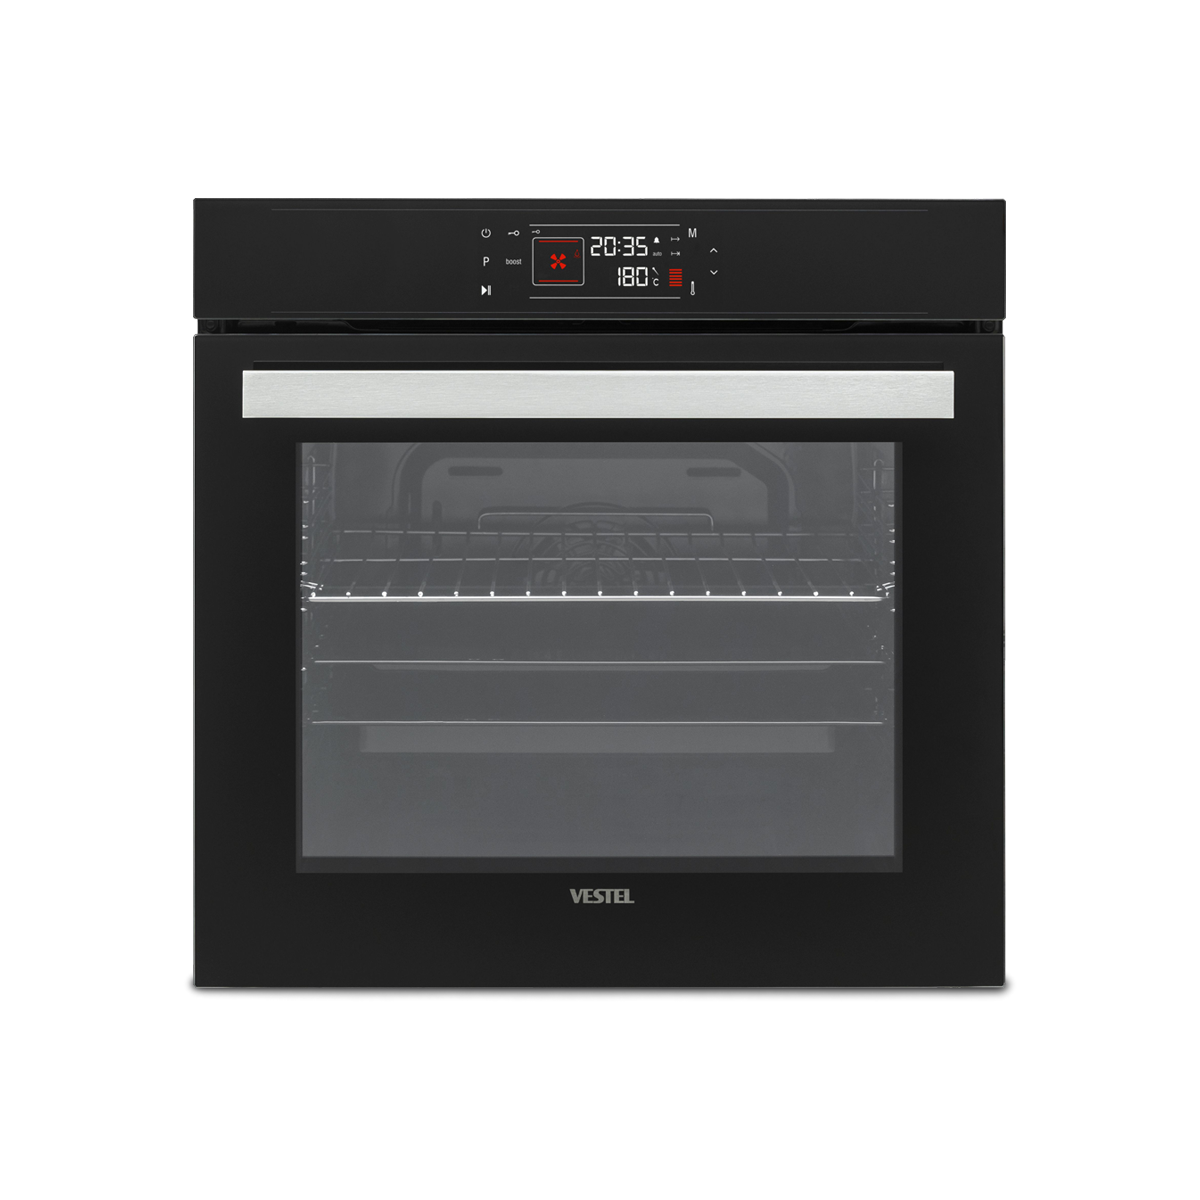 Built-in Oven AFB-8796